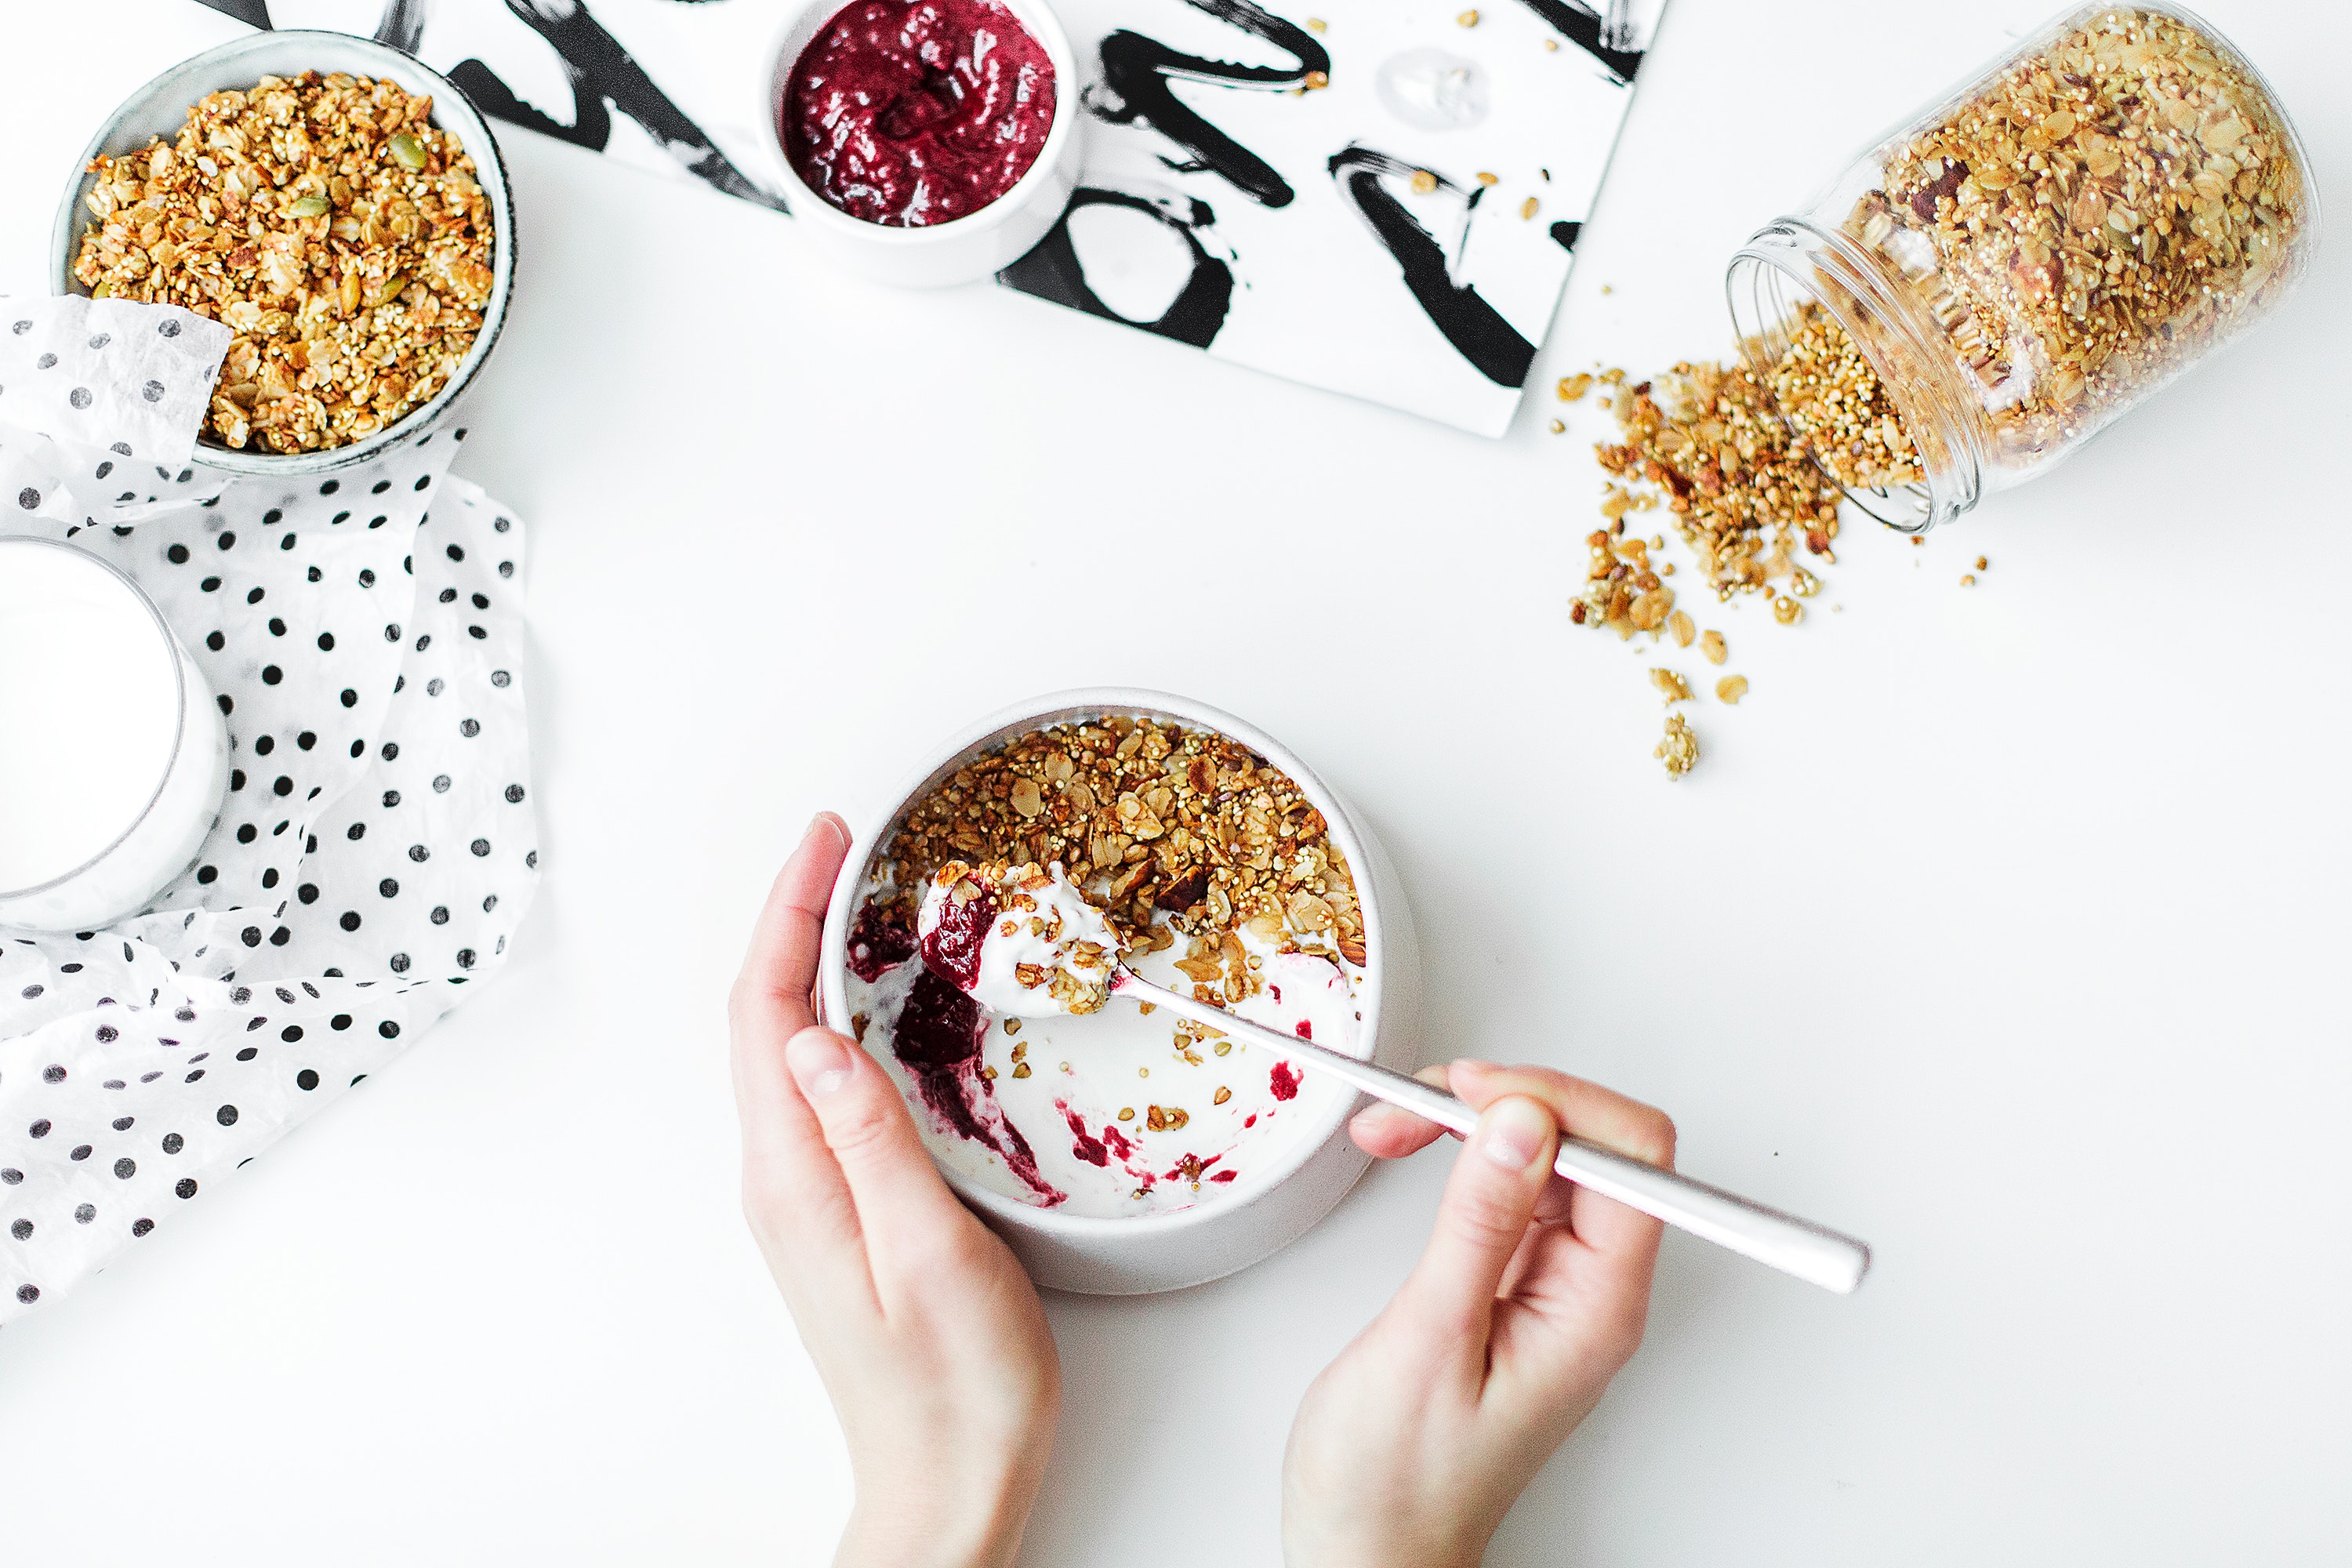 Person mixing cereal, milk, and strawberry jam on white ceramic bowl photo